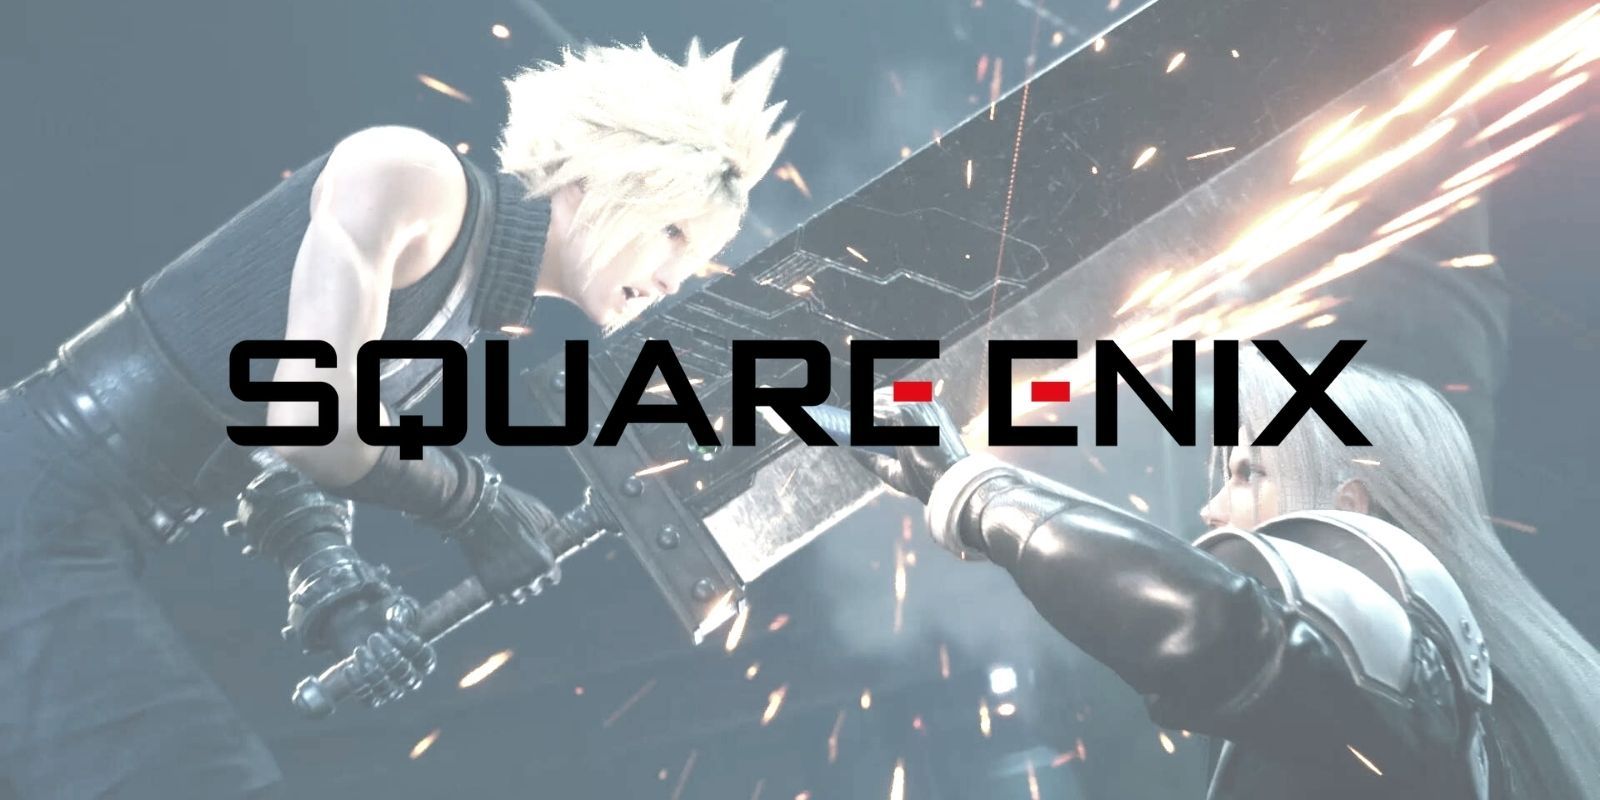 The logo of Square Enix on top of a screenshot from Final Fantasy VII Remake